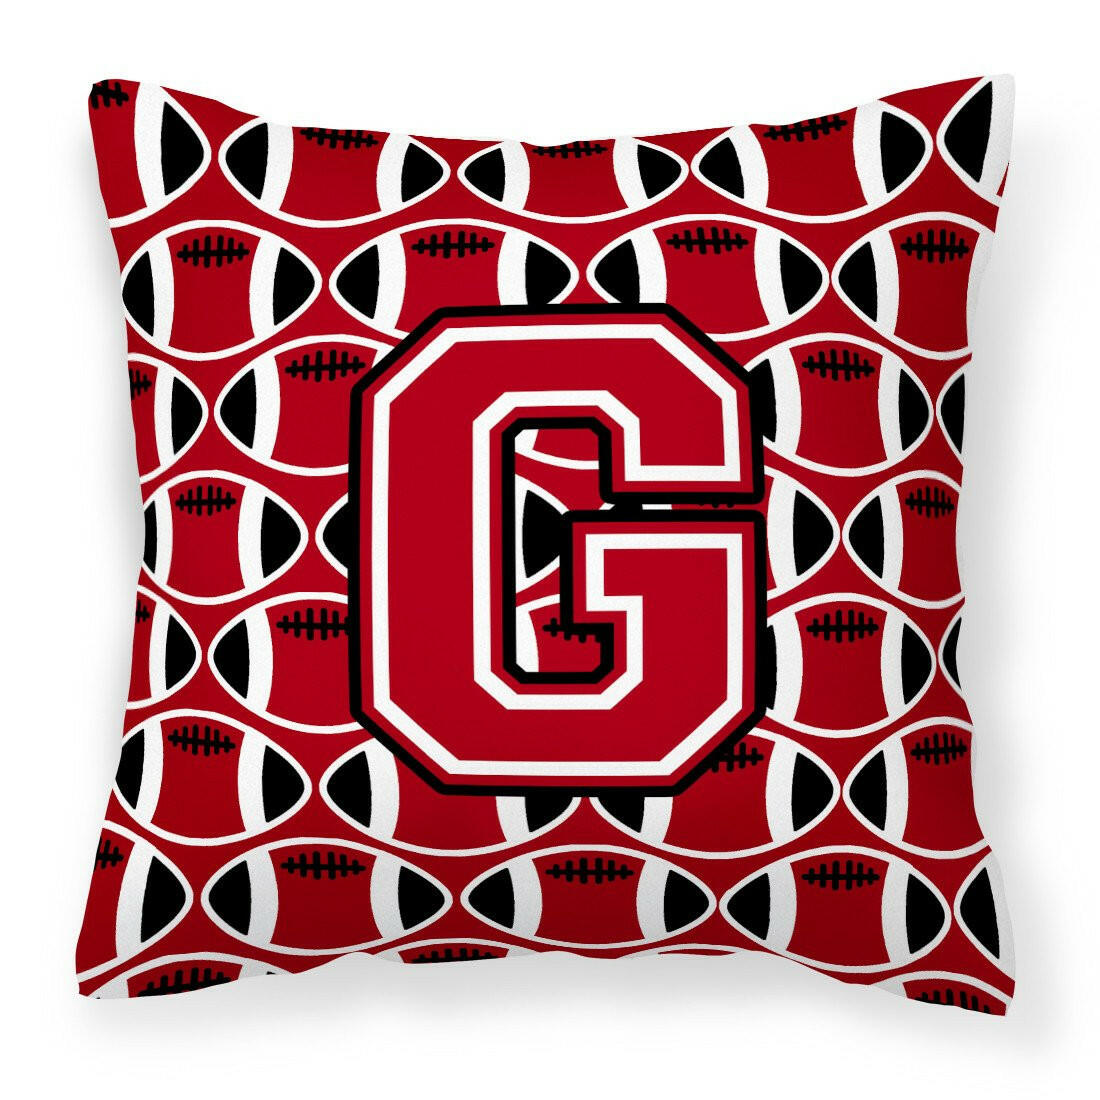 Letter G Football Red, Black and White Fabric Decorative Pillow CJ1073-GPW1414 by Caroline's Treasures